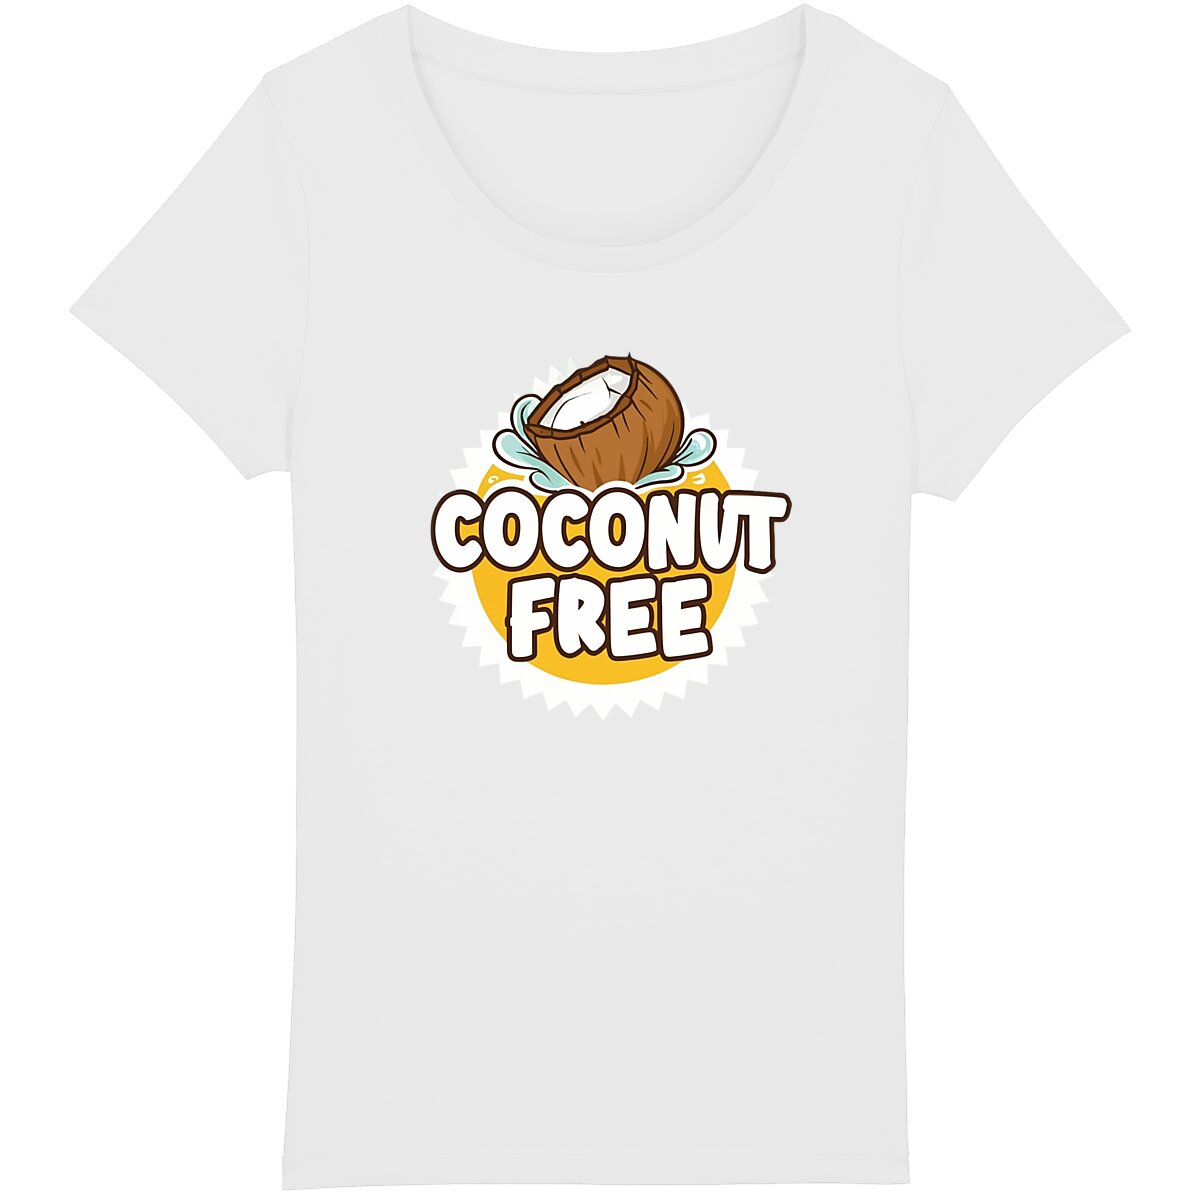 Coconut Free Organic Cotton Graphic Tee | Hypoallergenic - Allergy Friendly - Naturally Free